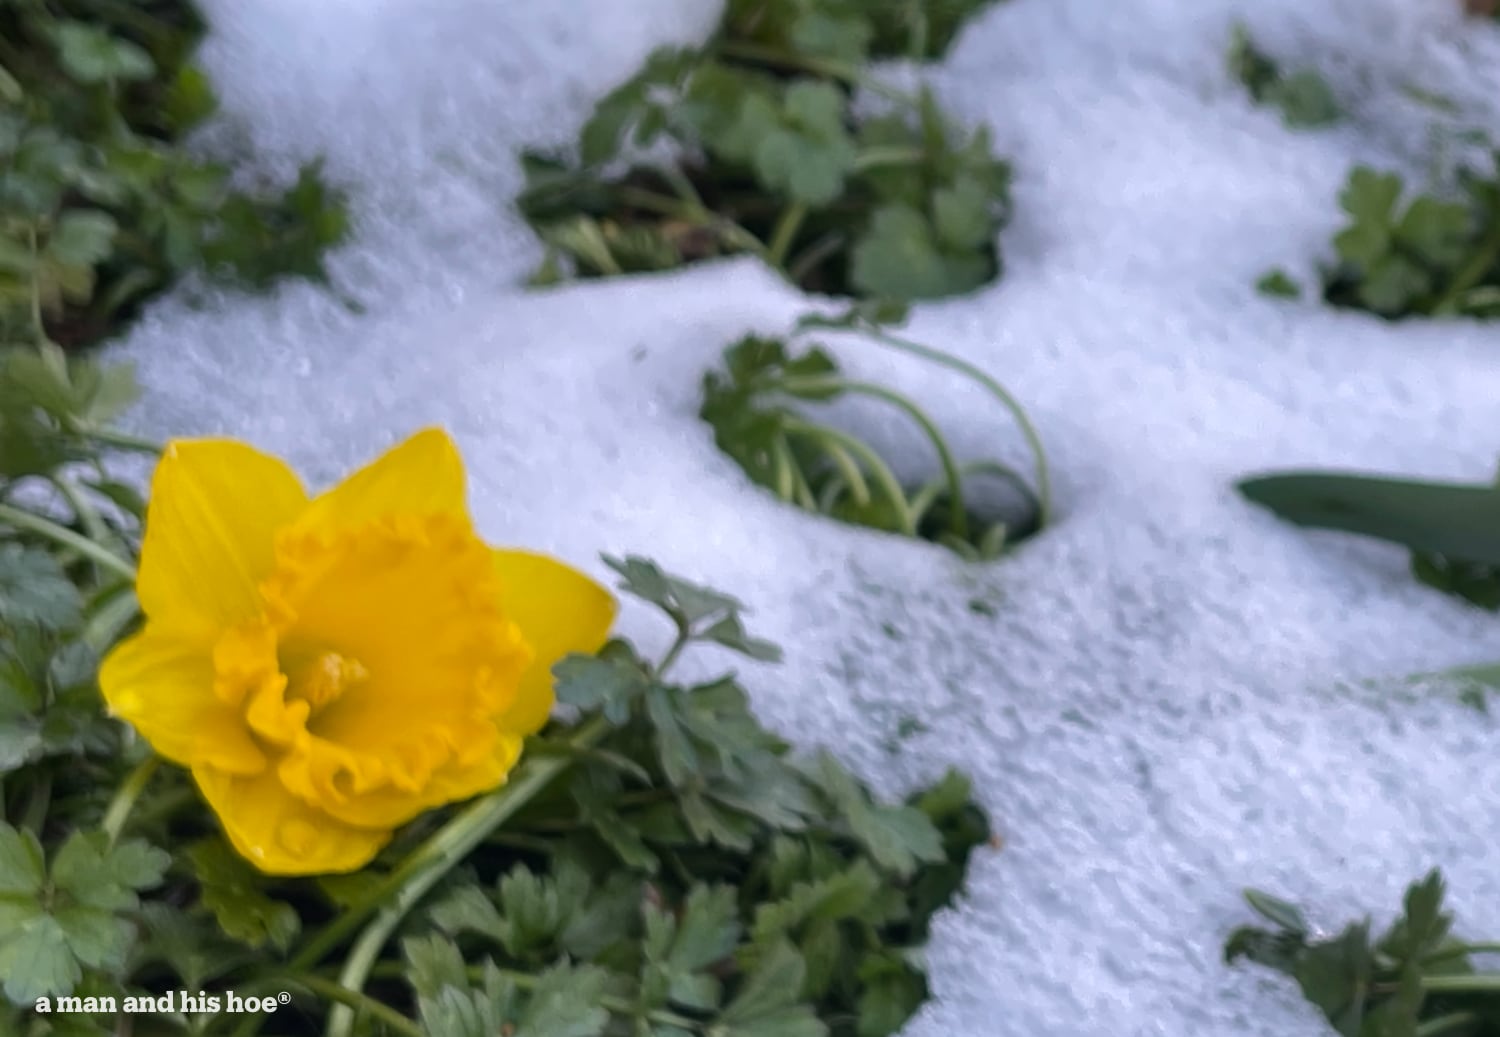 Change is in the air - daffodil in the snow